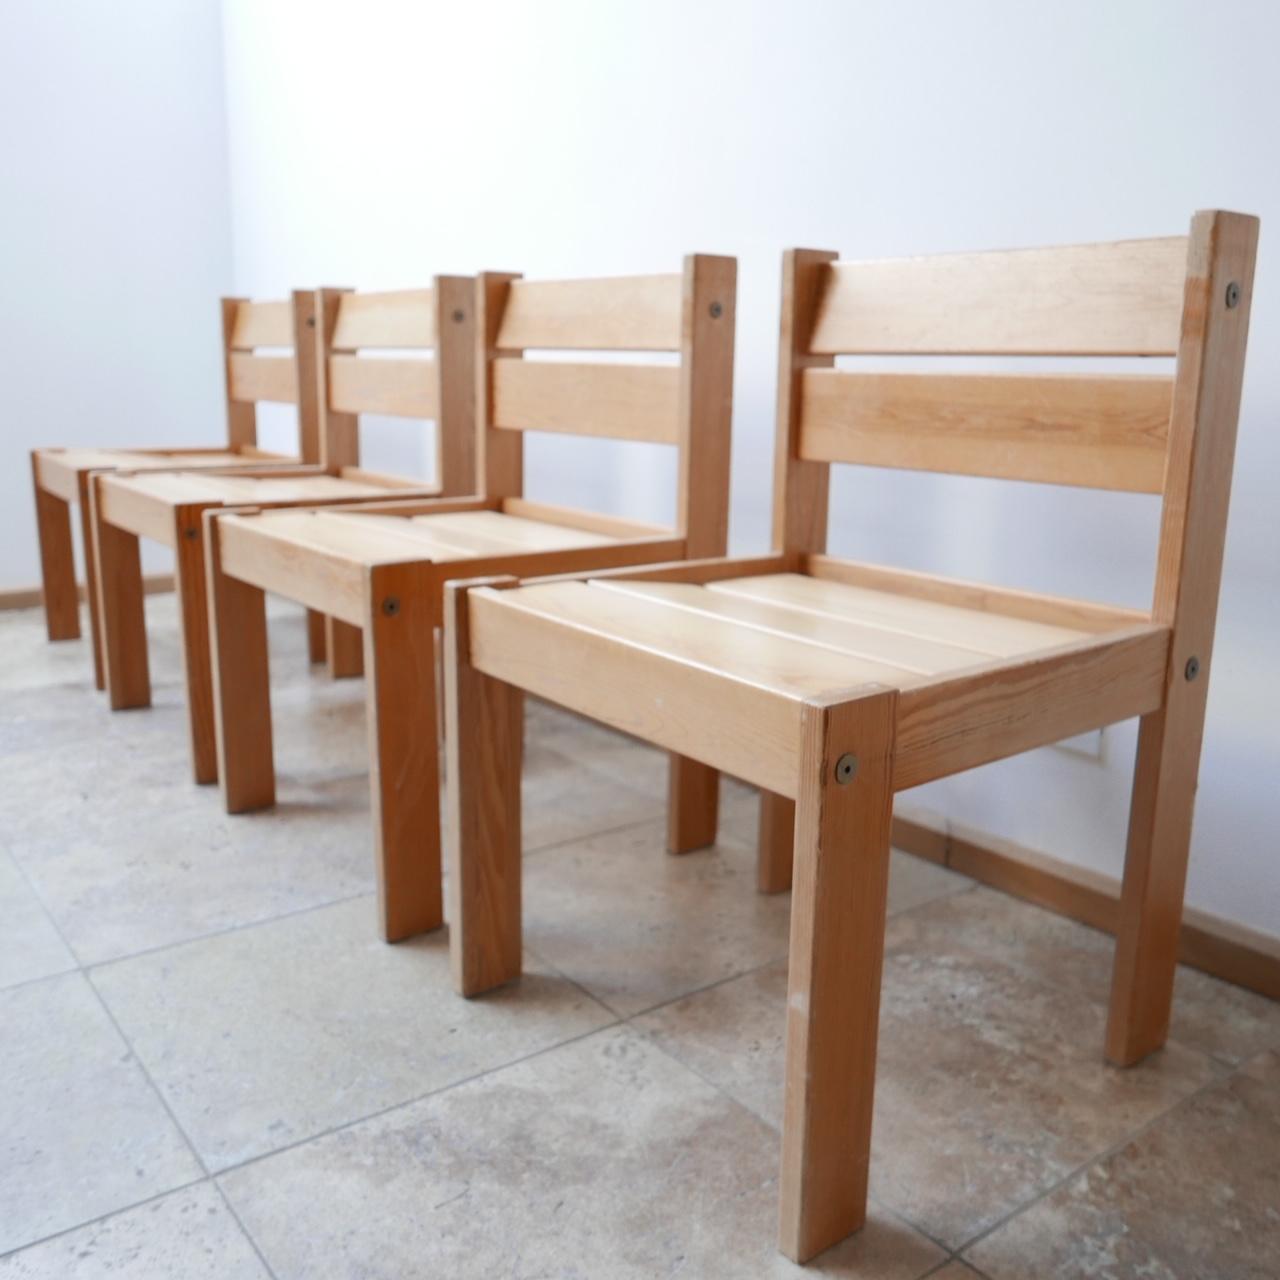 
Four in the set. 

Sweden, c1970s. 

Could work well with a cushion to raise the height if needed. 

Surface scratches and wear but structurally sound. 

Dimensions: 49.5 W x 48 D x 42 seat height x 75.5 total height in cm.